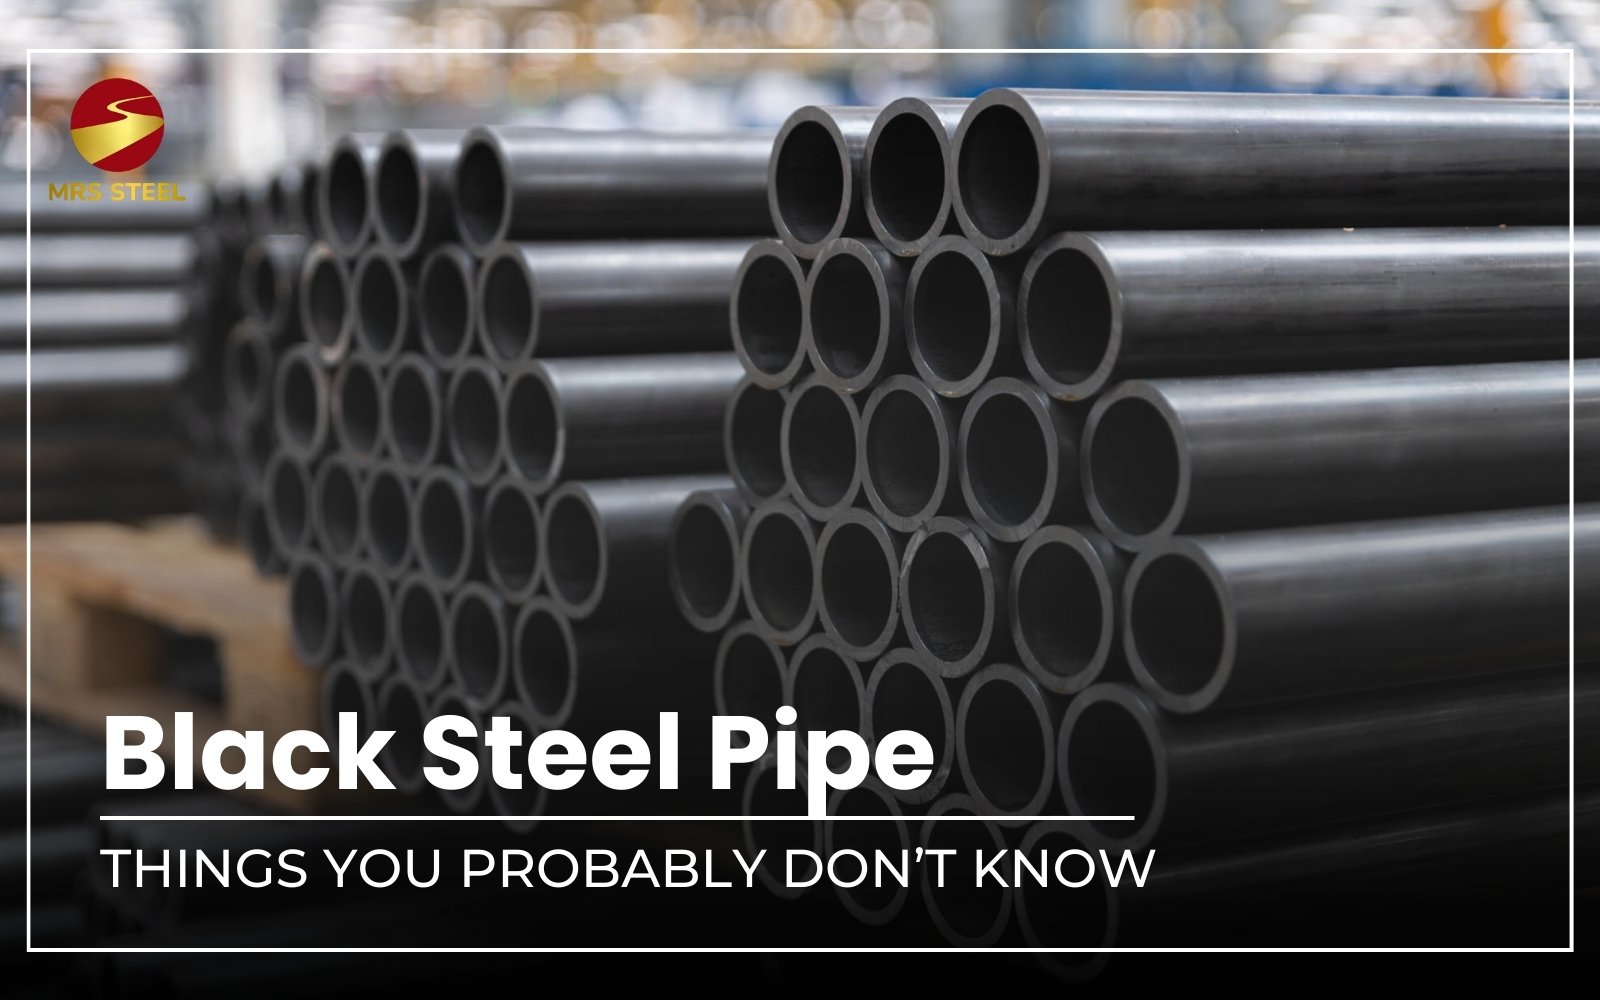 Learn About Black Steel Pipe And Things You Probably Don't Know